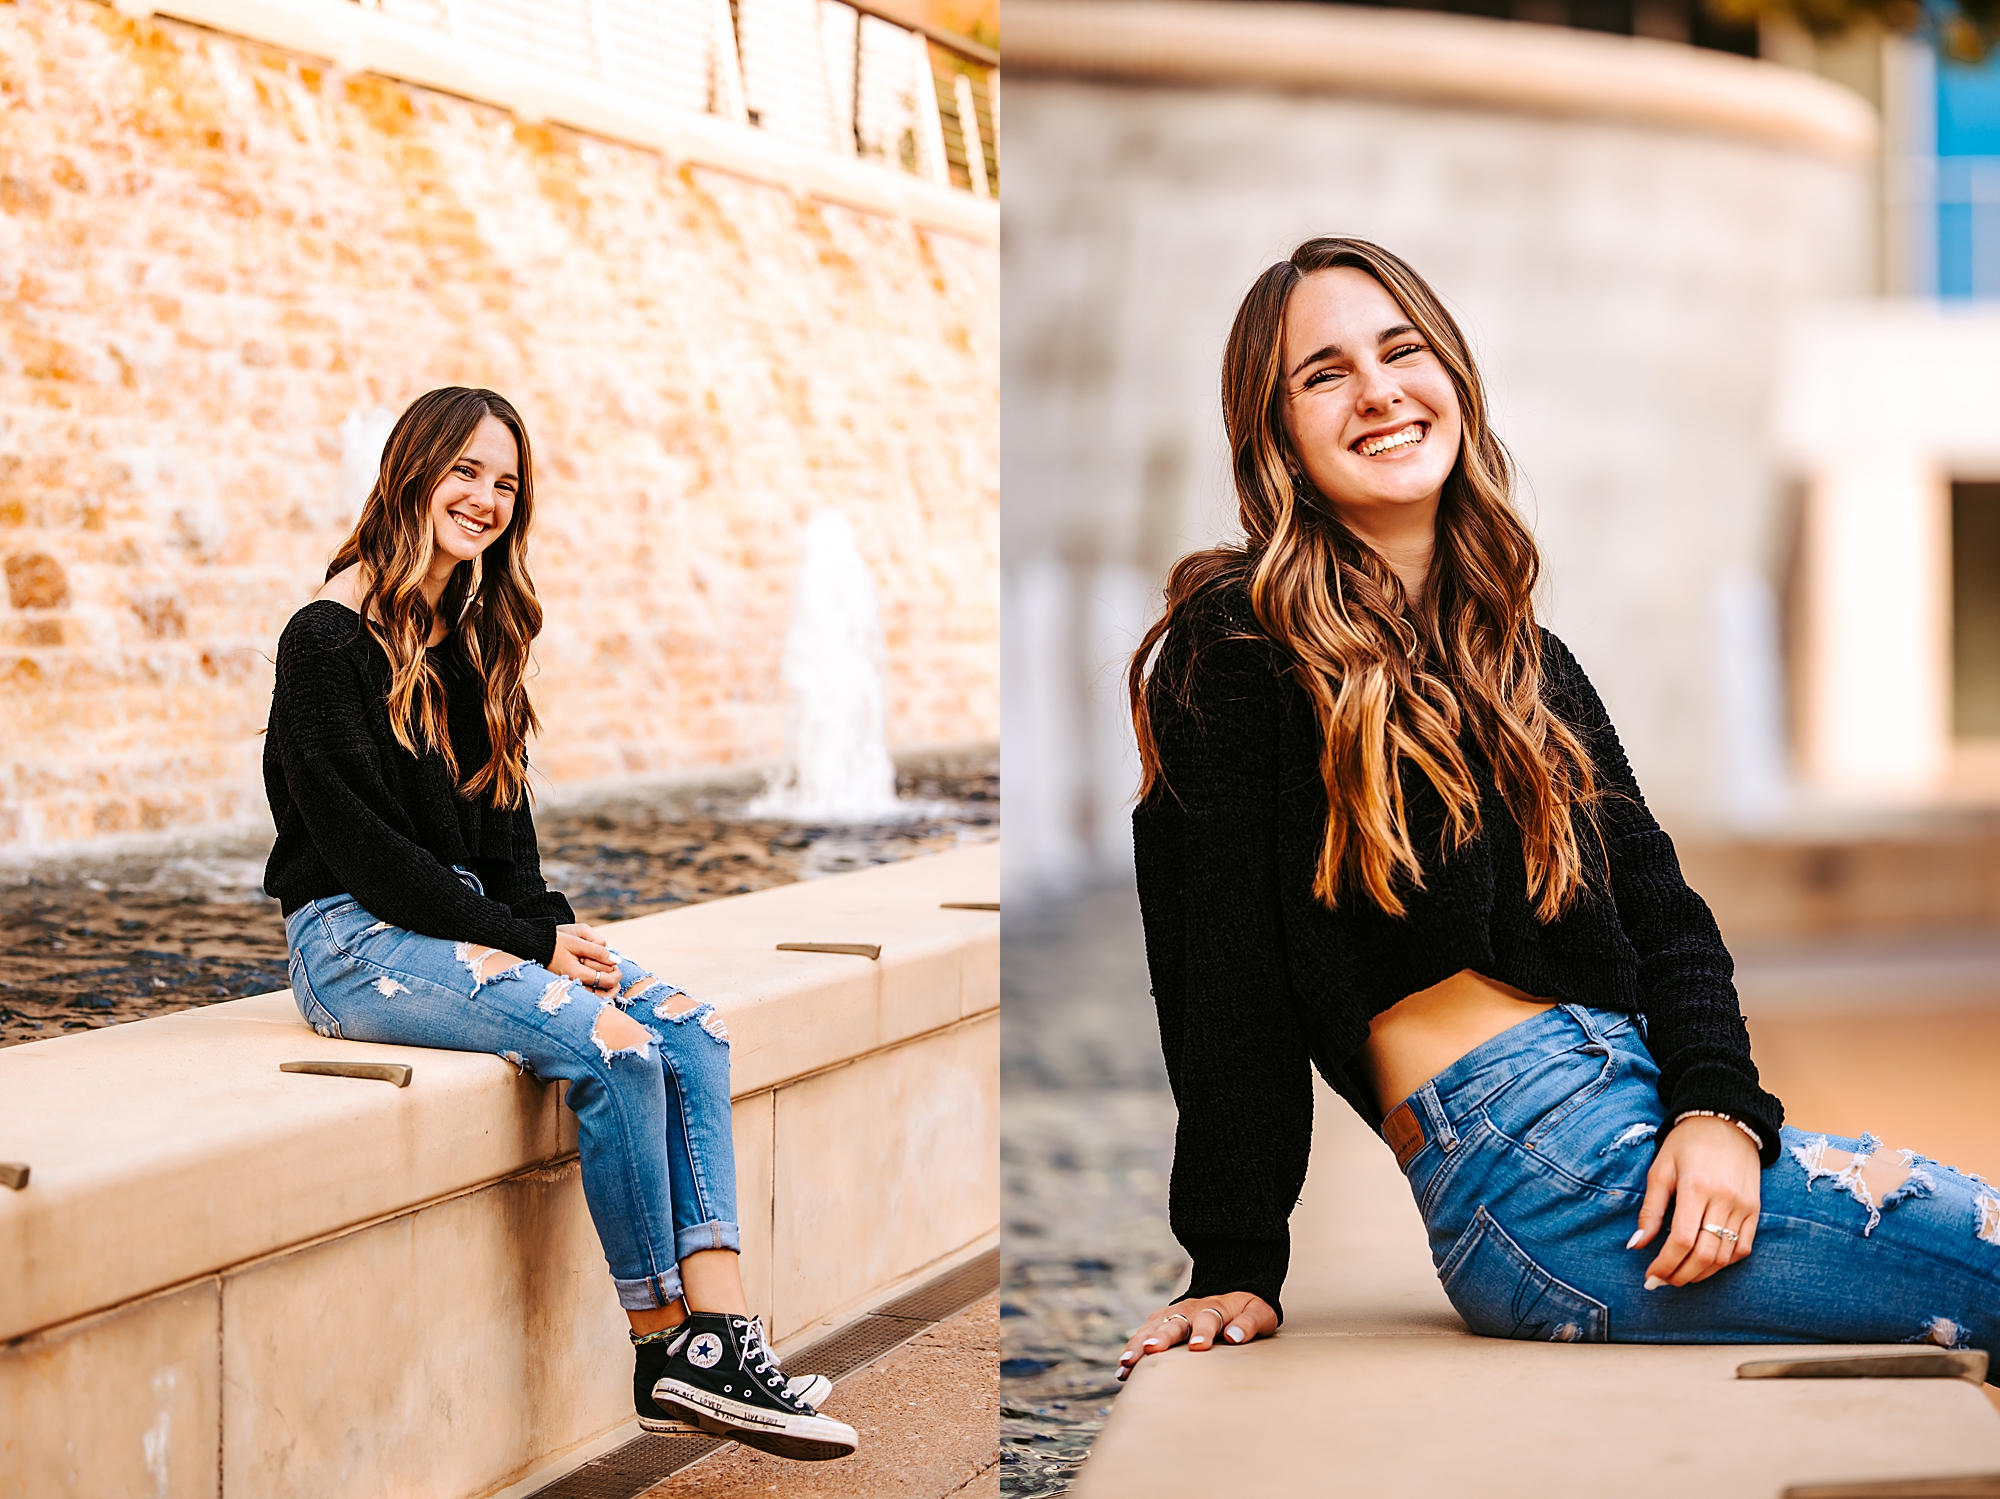 What to Wear for Senior Pictures | 5 Senior Picture Outfits for Your Session